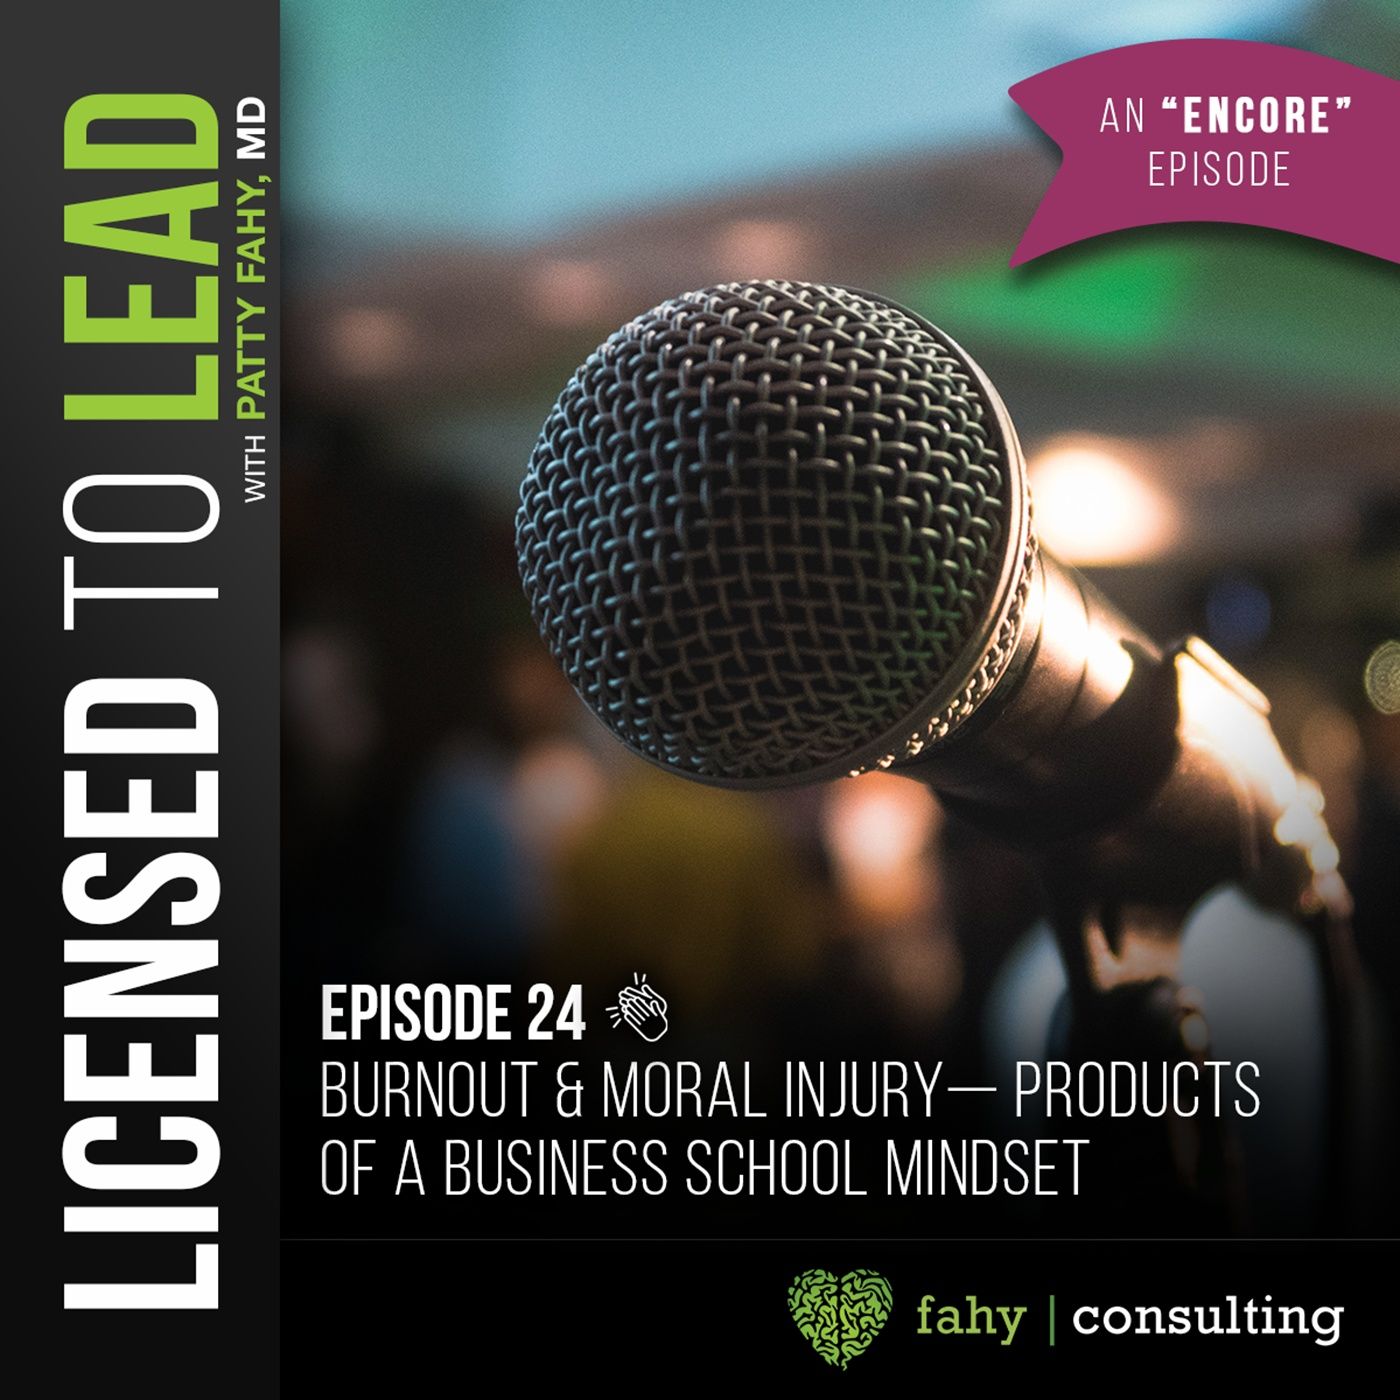 024 - Burnout and Moral Injury: Products of a Business School Mindset